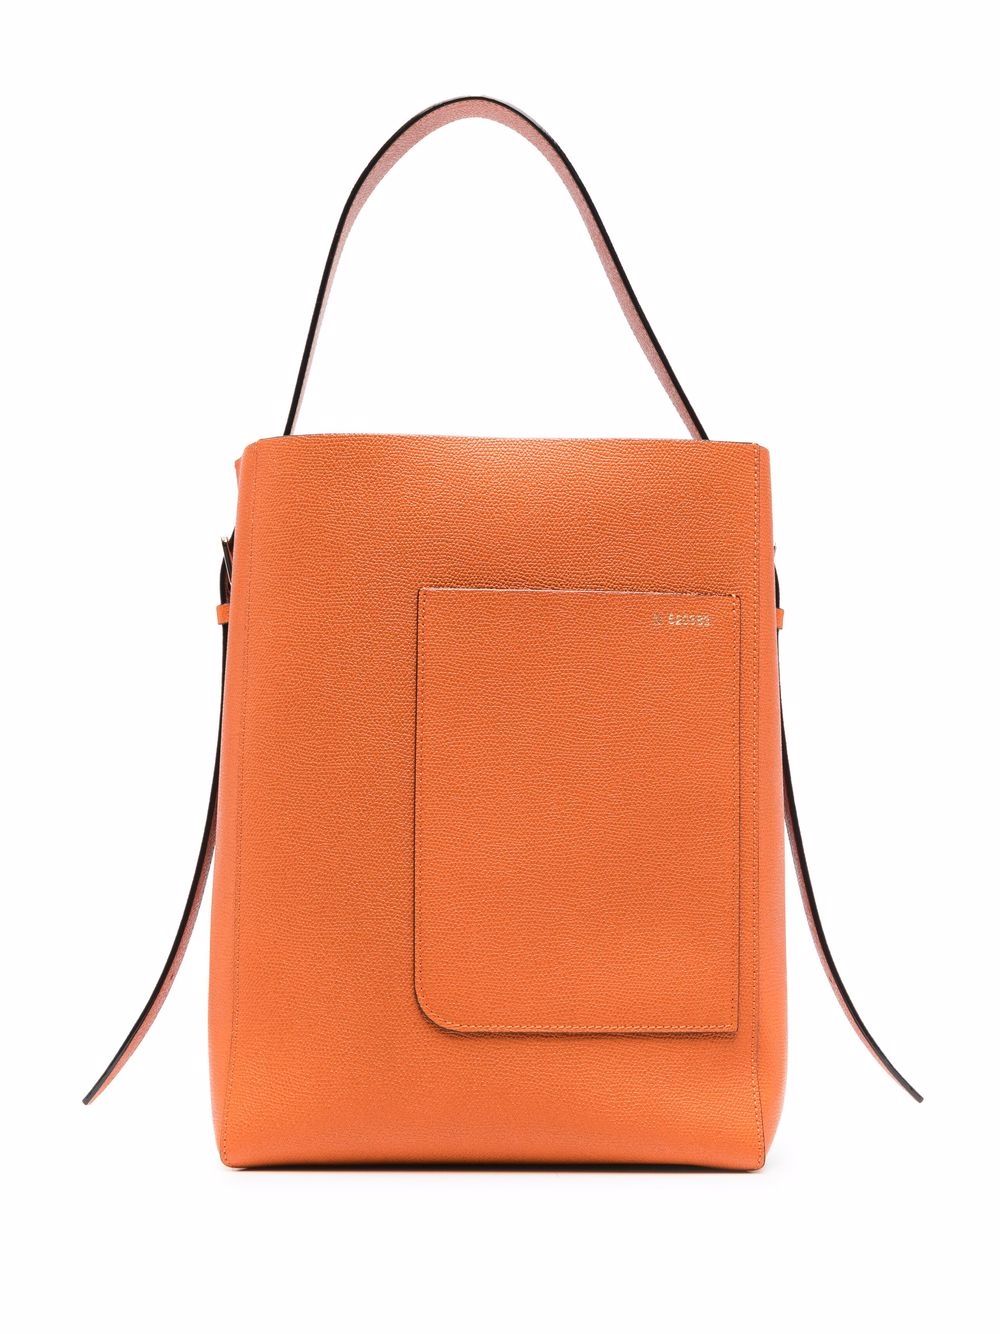 фото Valextra open-top leather shoulder bag